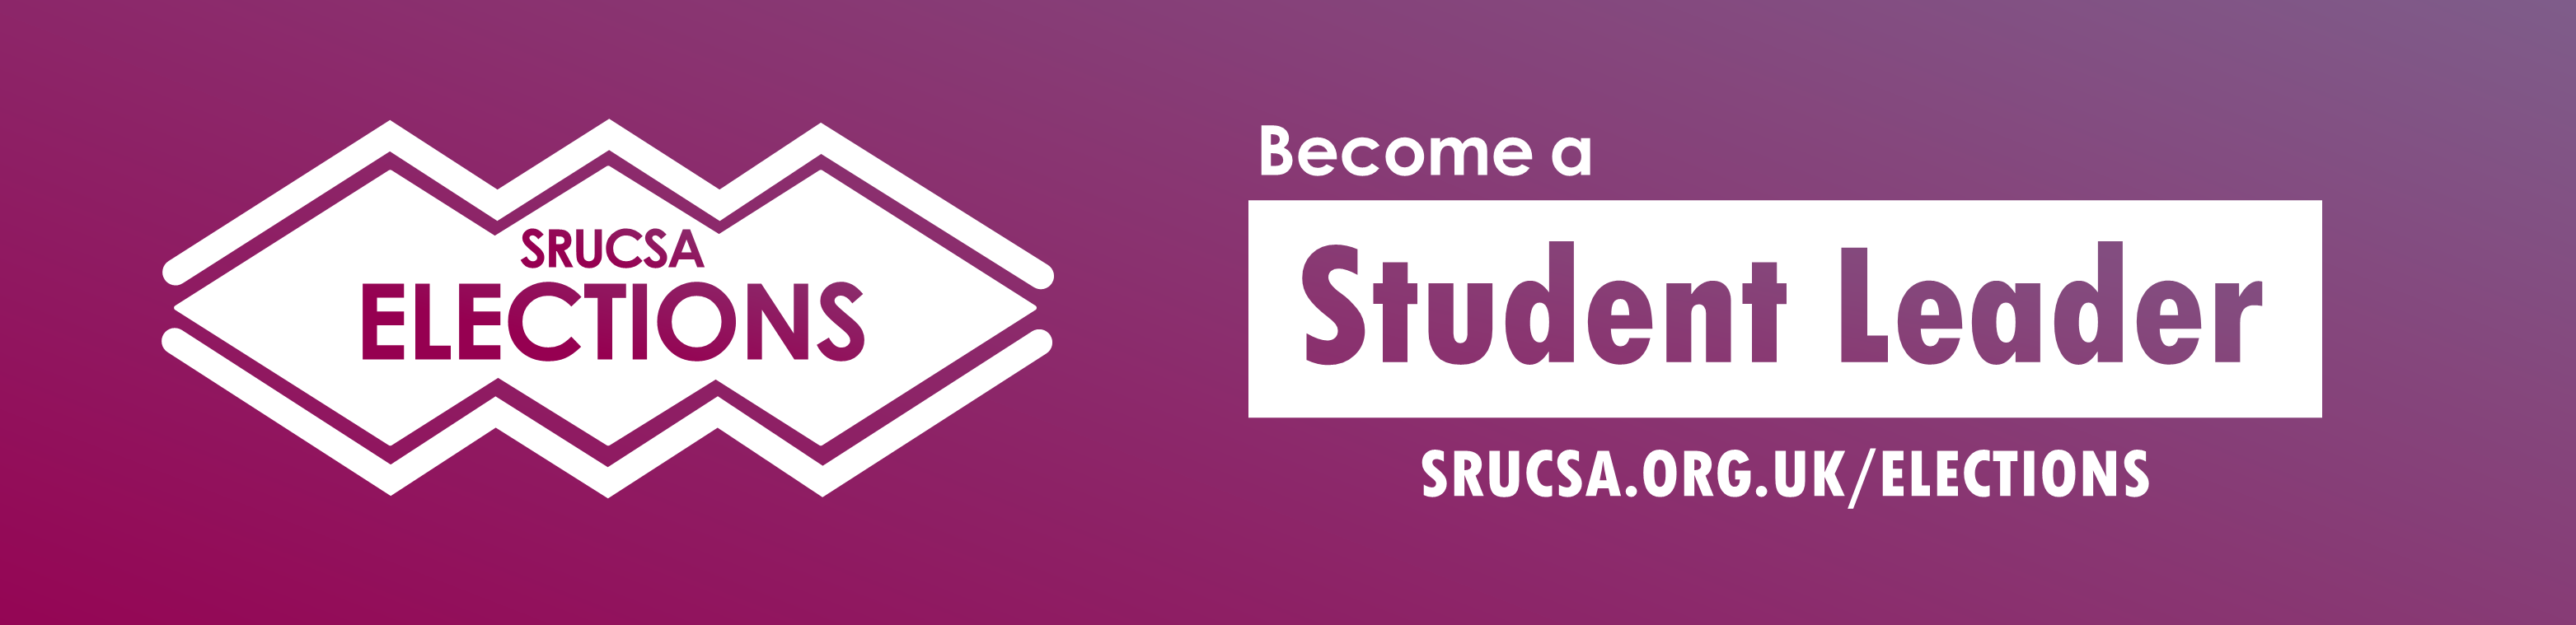 SRUCSA Elections - Be a Student Leader